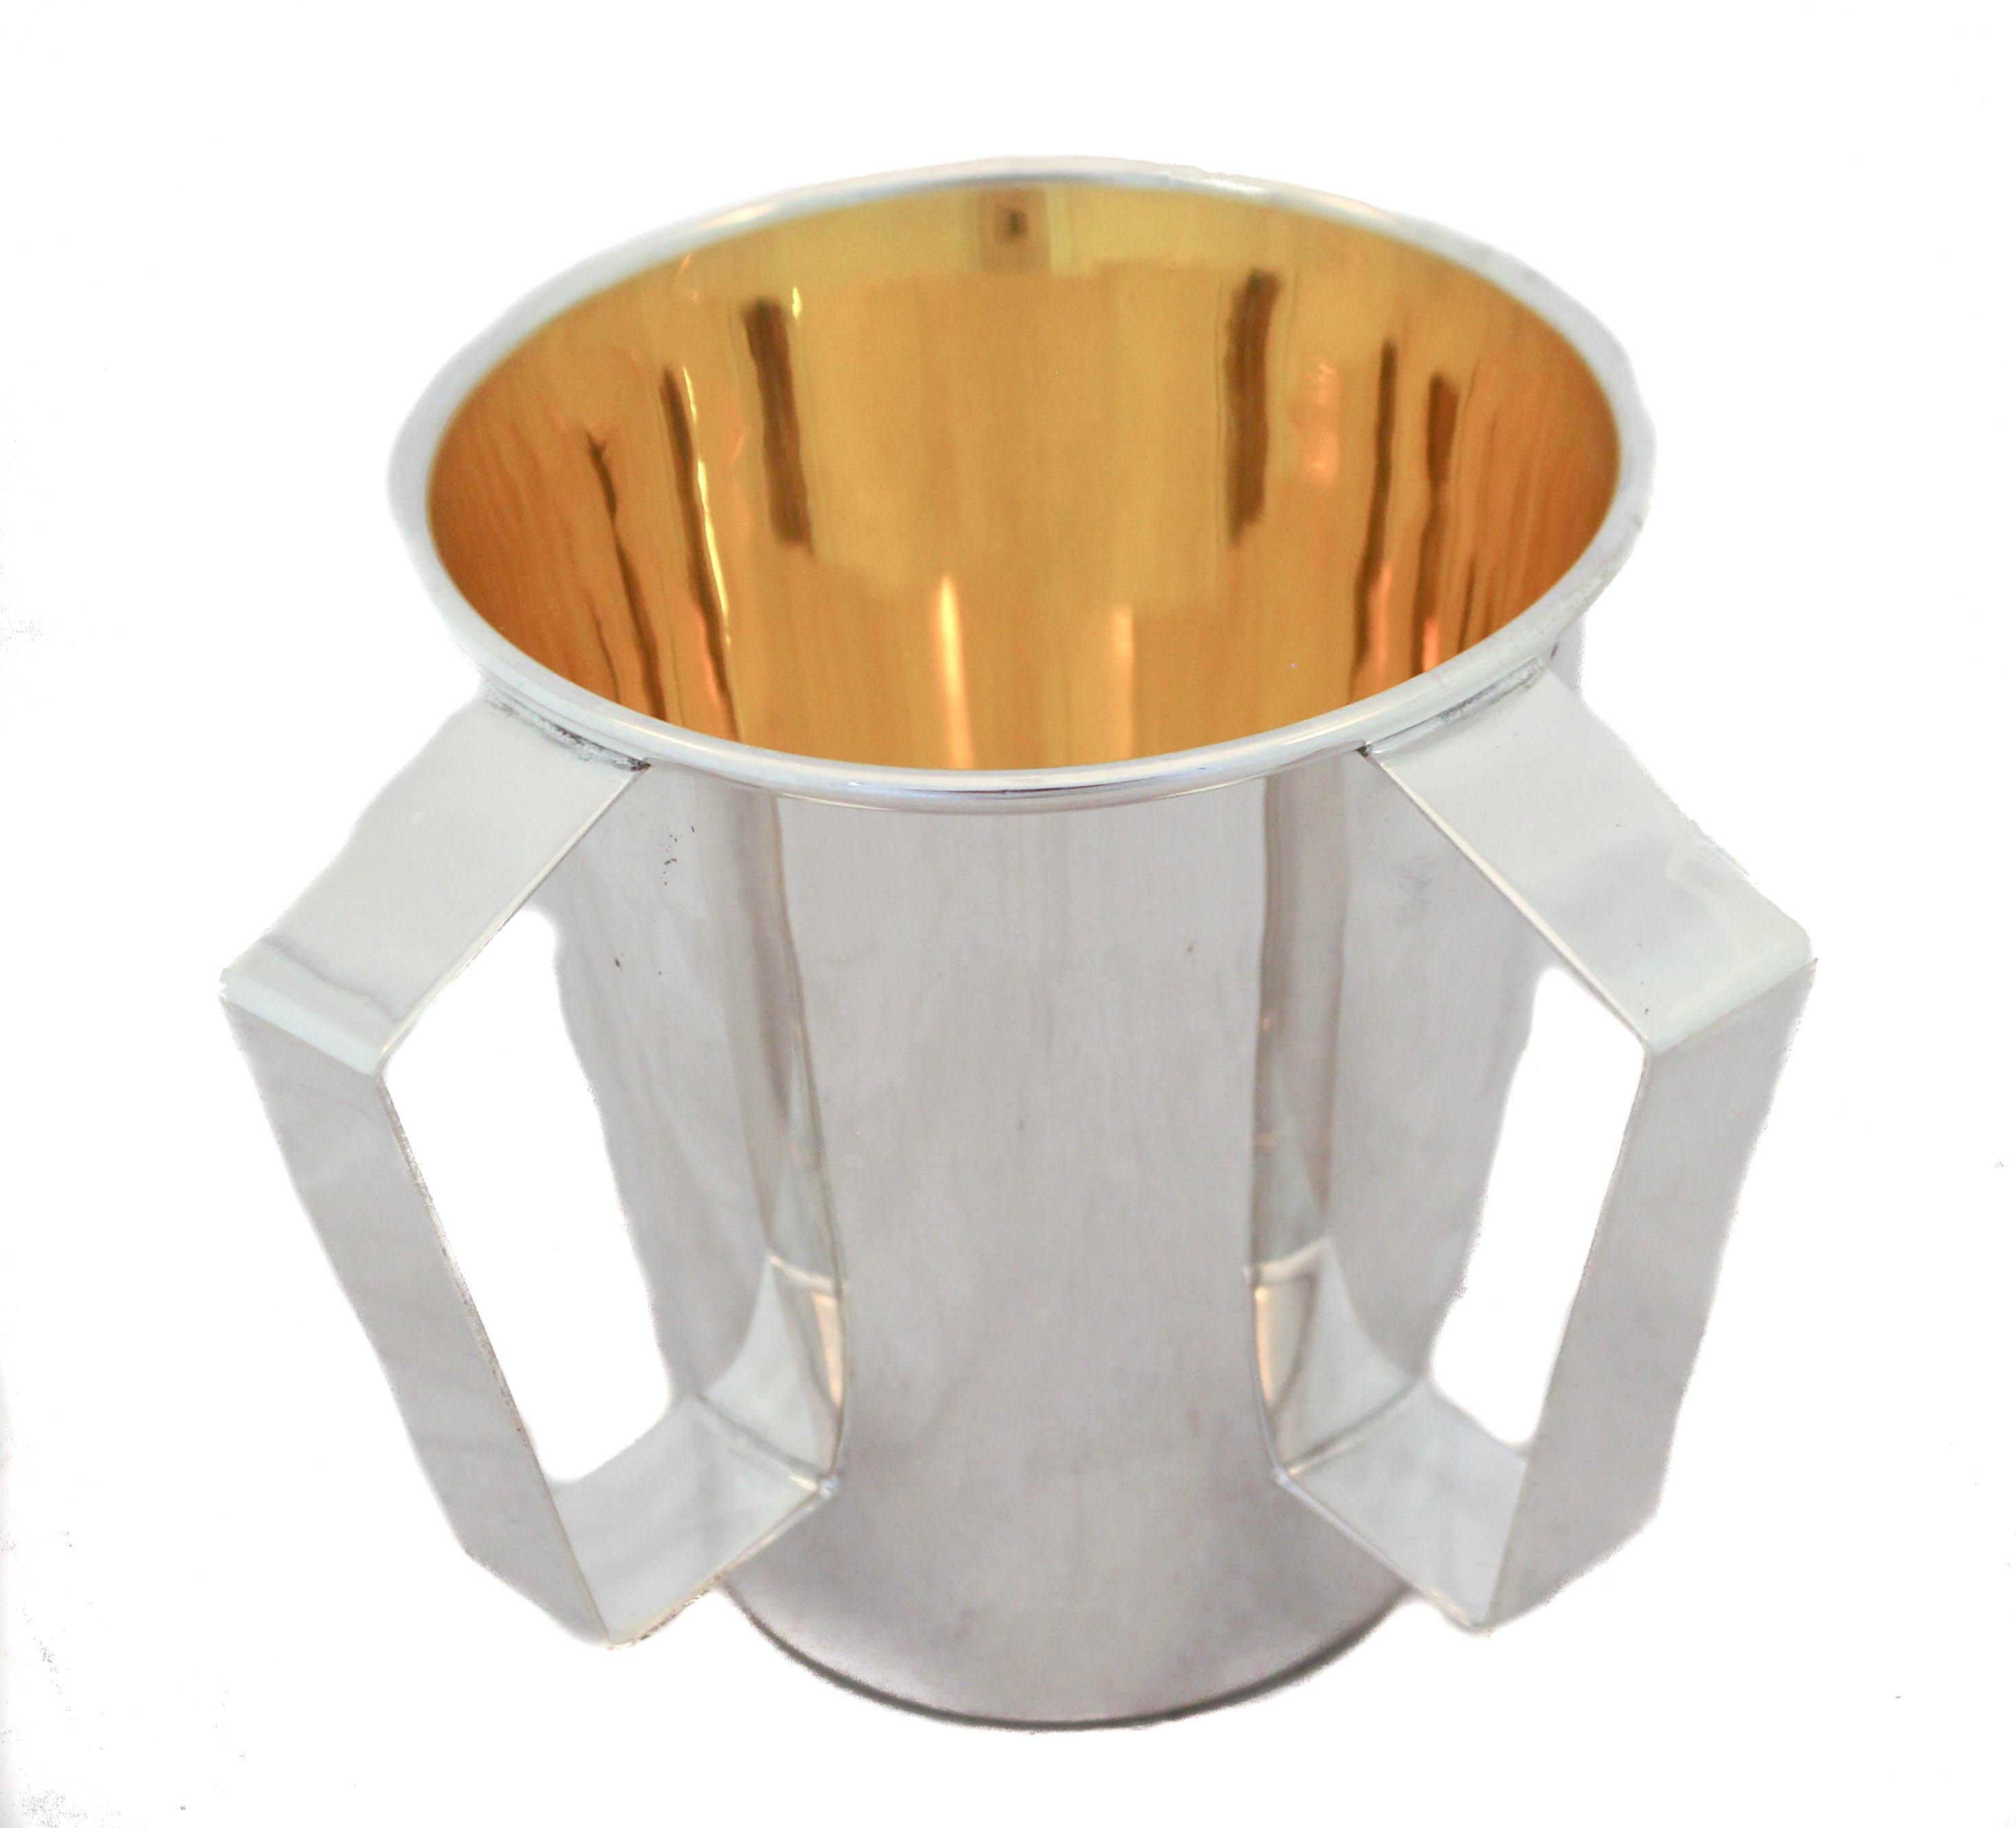 We are happy to offer you this sterling silver washing cup (n’tillat yadaiyim in Hebrew). It is used to wash the hands before eating bread and praying. This cup is uber-sleek and modern, it has that “hotel silver” look. The shape is contemporary